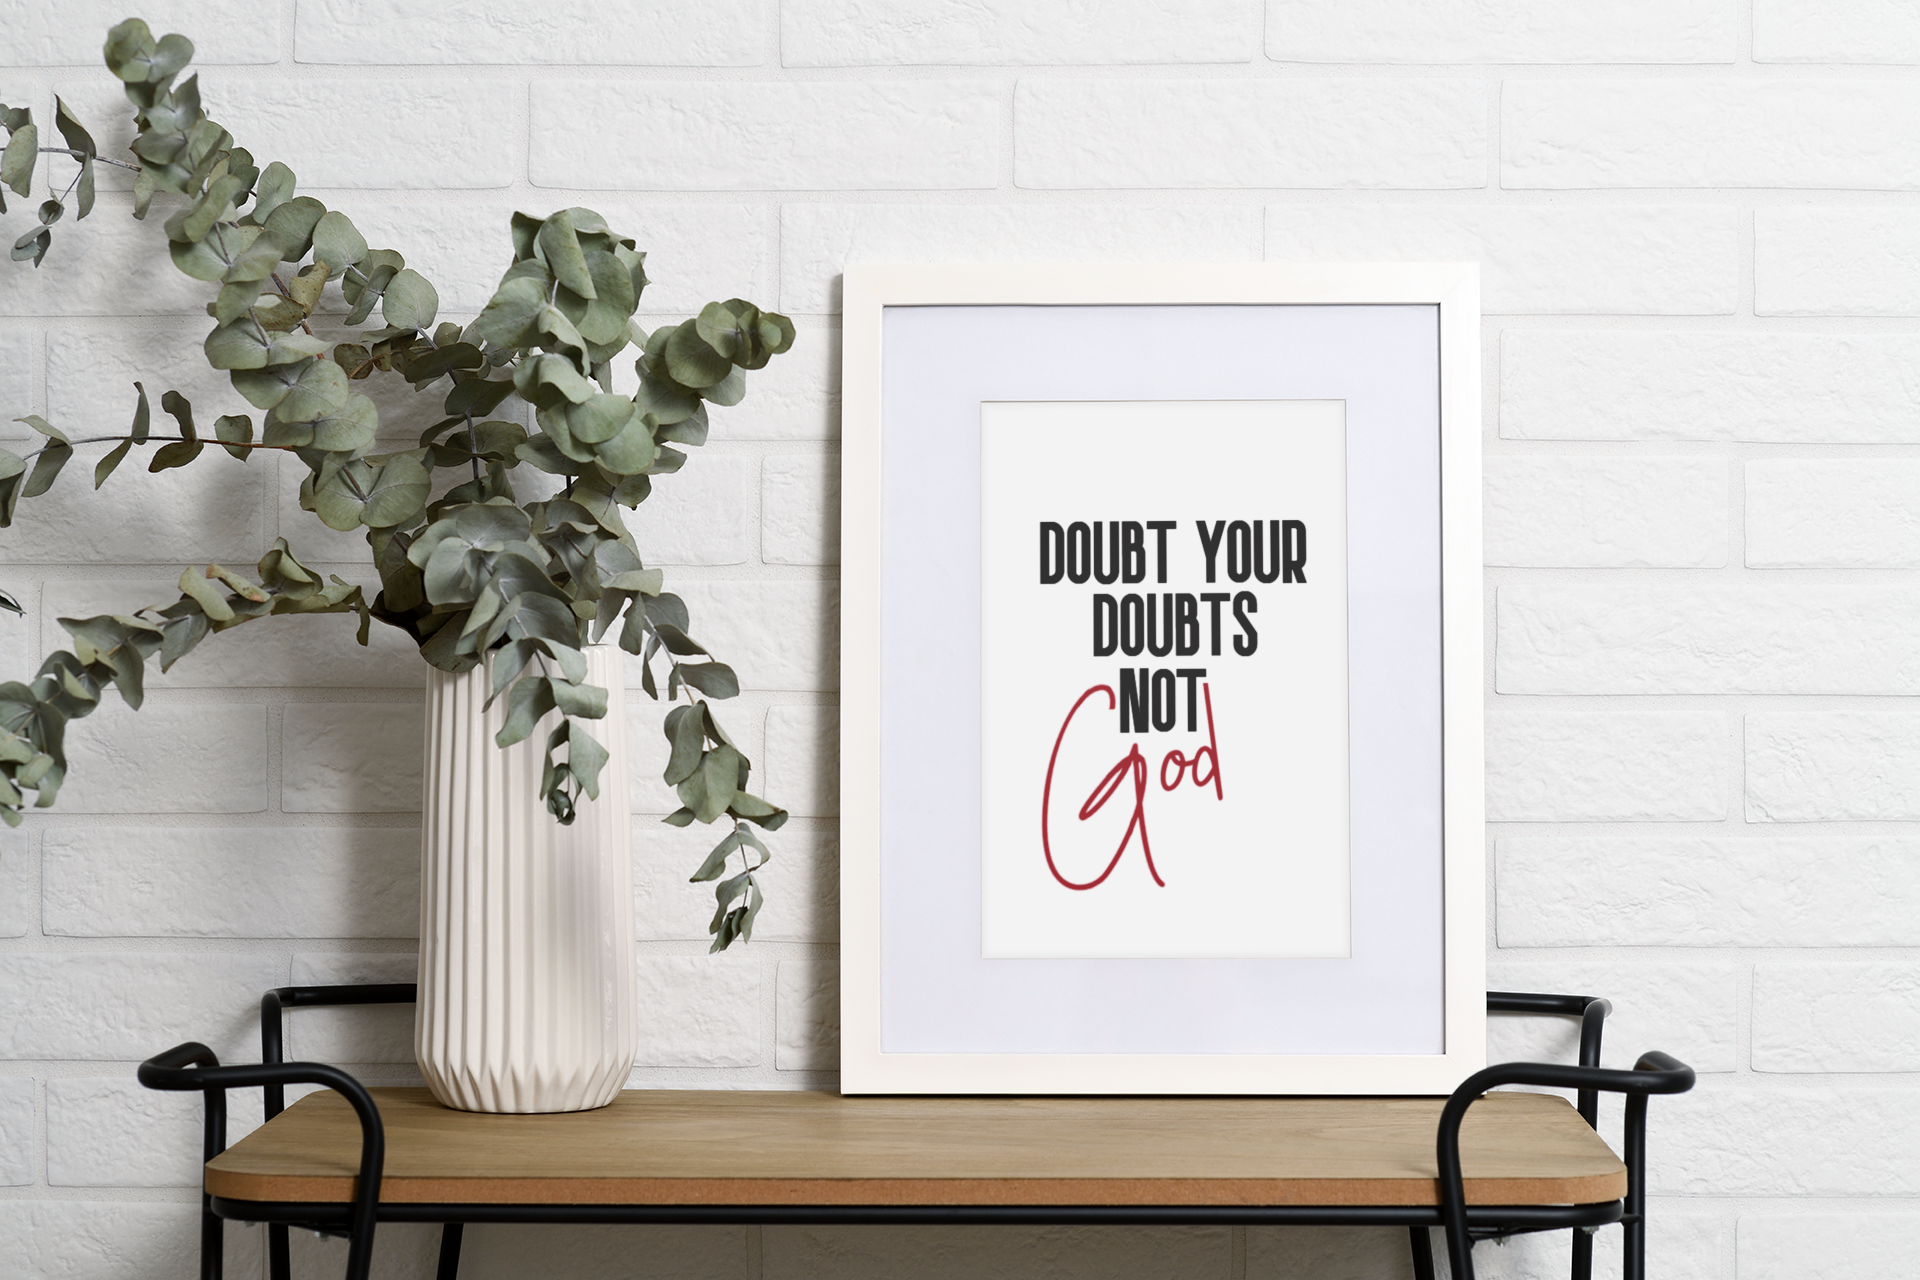 Doubt your doubts Not GOD - Trendy Wall print | Trendy Digital Print | Trendy Wall Art | Wall Decor | Christian Poster | Wall Poster